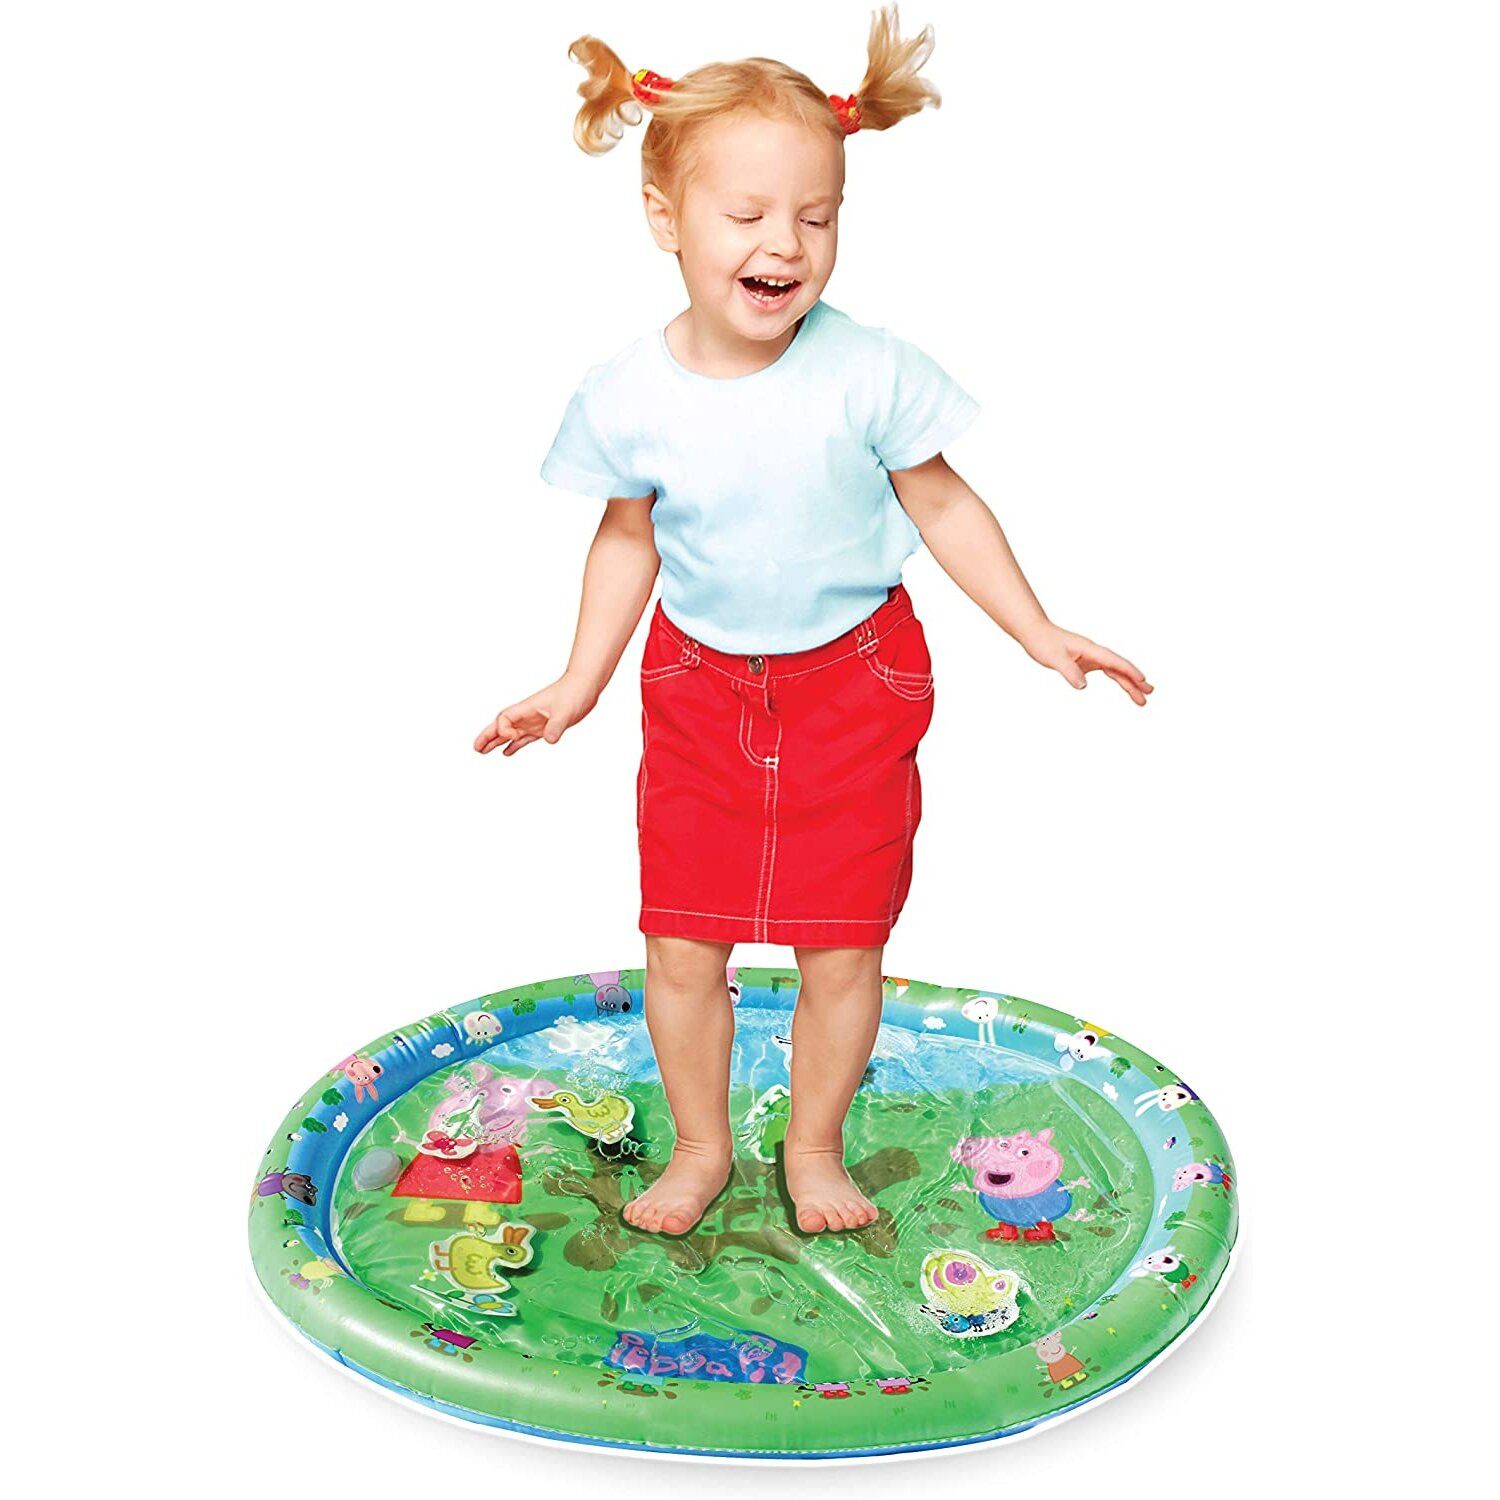 Peppa Pig BTPP004 Inflatable Muddy Puddle Play Mat by Bladez Toyz EOne Water Filled, Mixed, 75 cm Wide